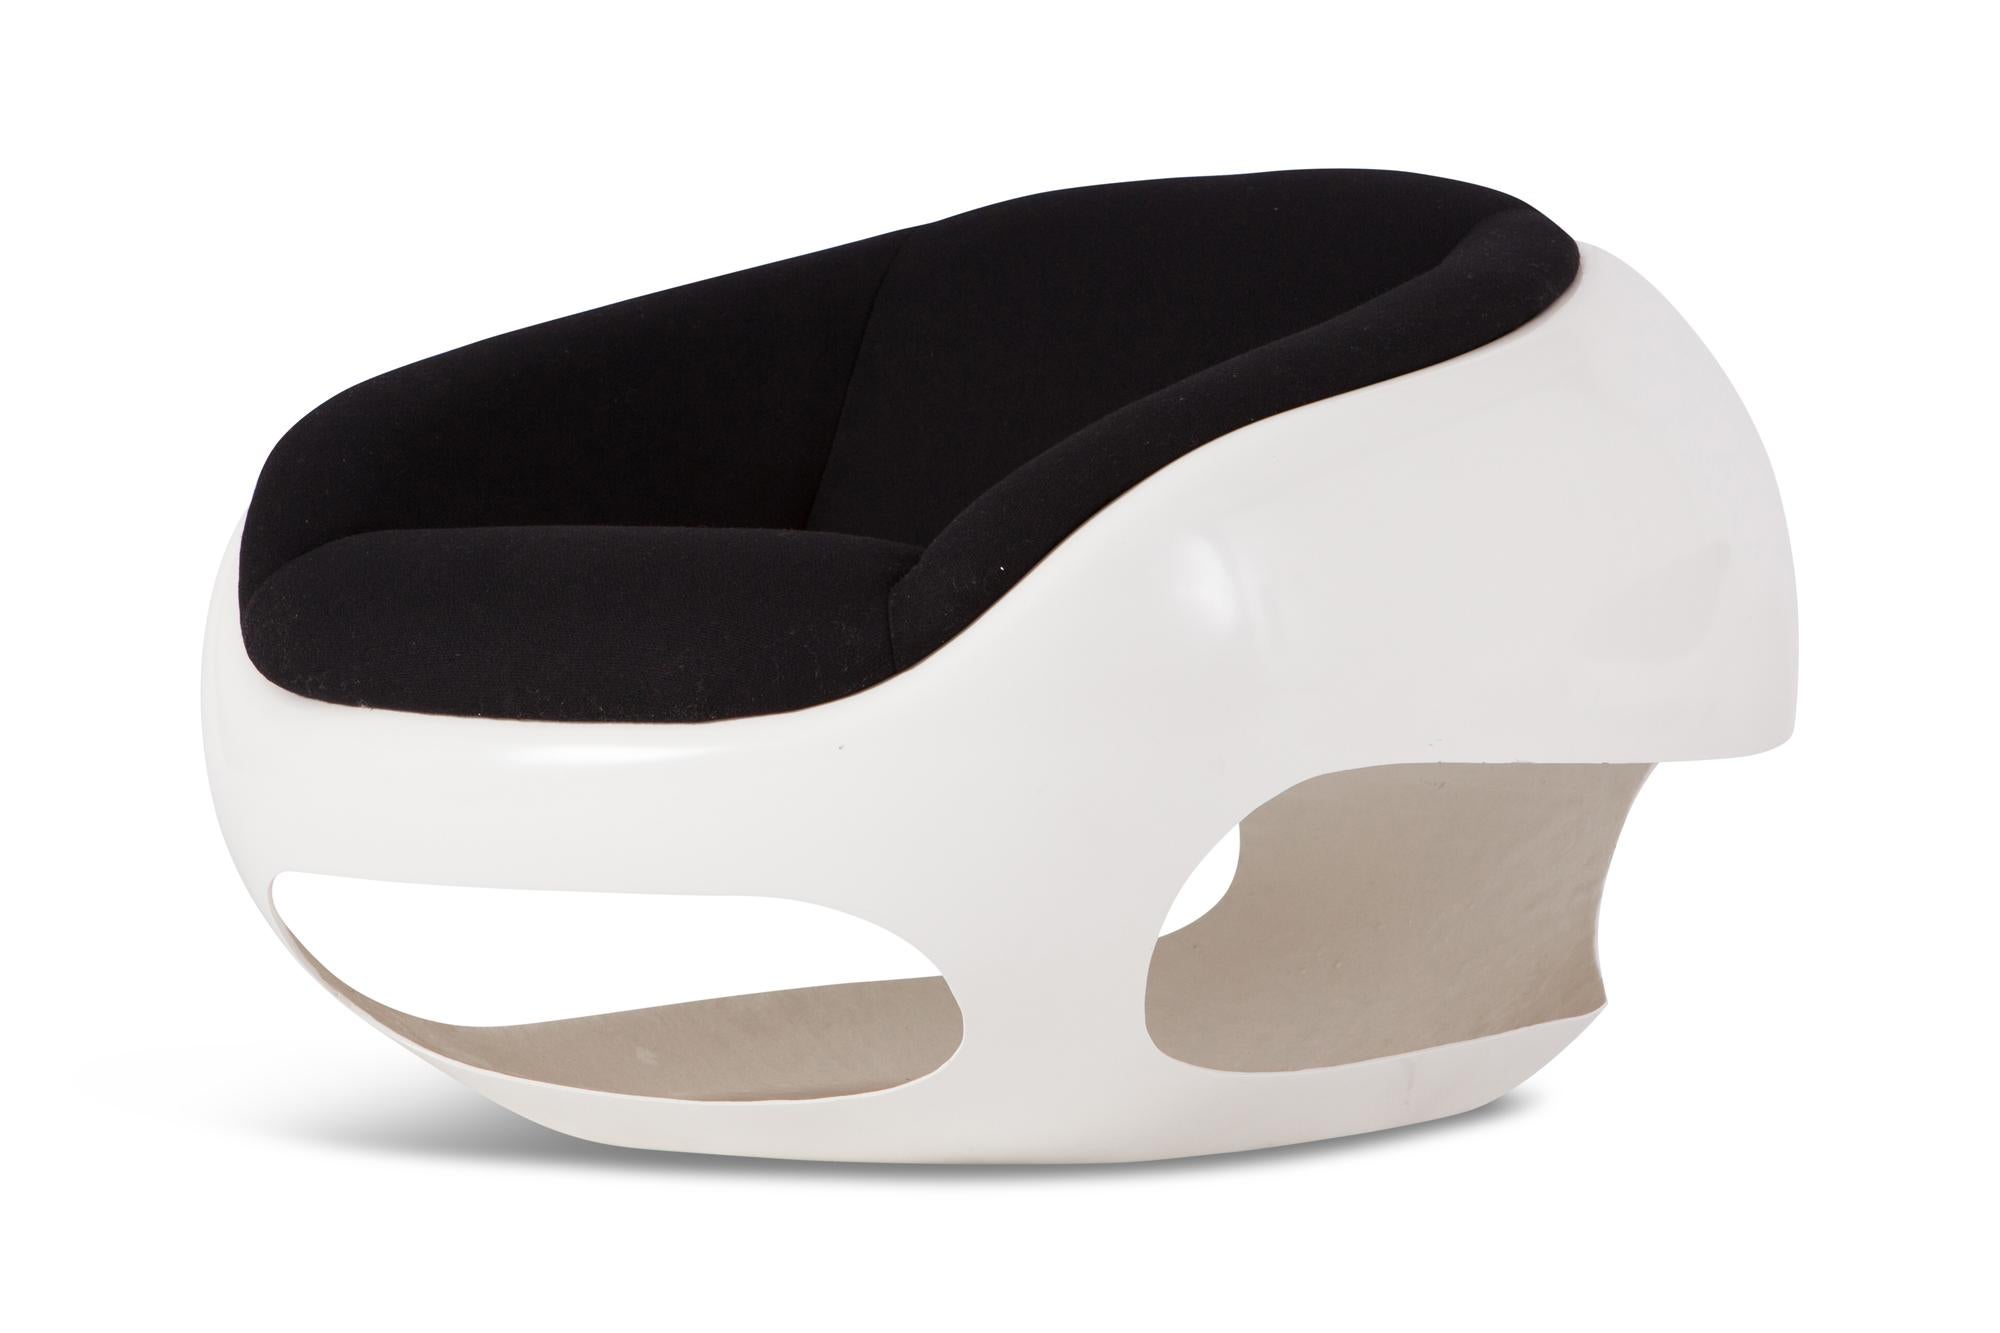 Postmodern pair of lounge chairs by Italian designer Mario Sabot. Previously owned by Pierre Cardin and Malene Birger
The design was inspired by the GT series of Ferrari in the 1960s. 

White fiberglass base and a black woolen upholstery seat,